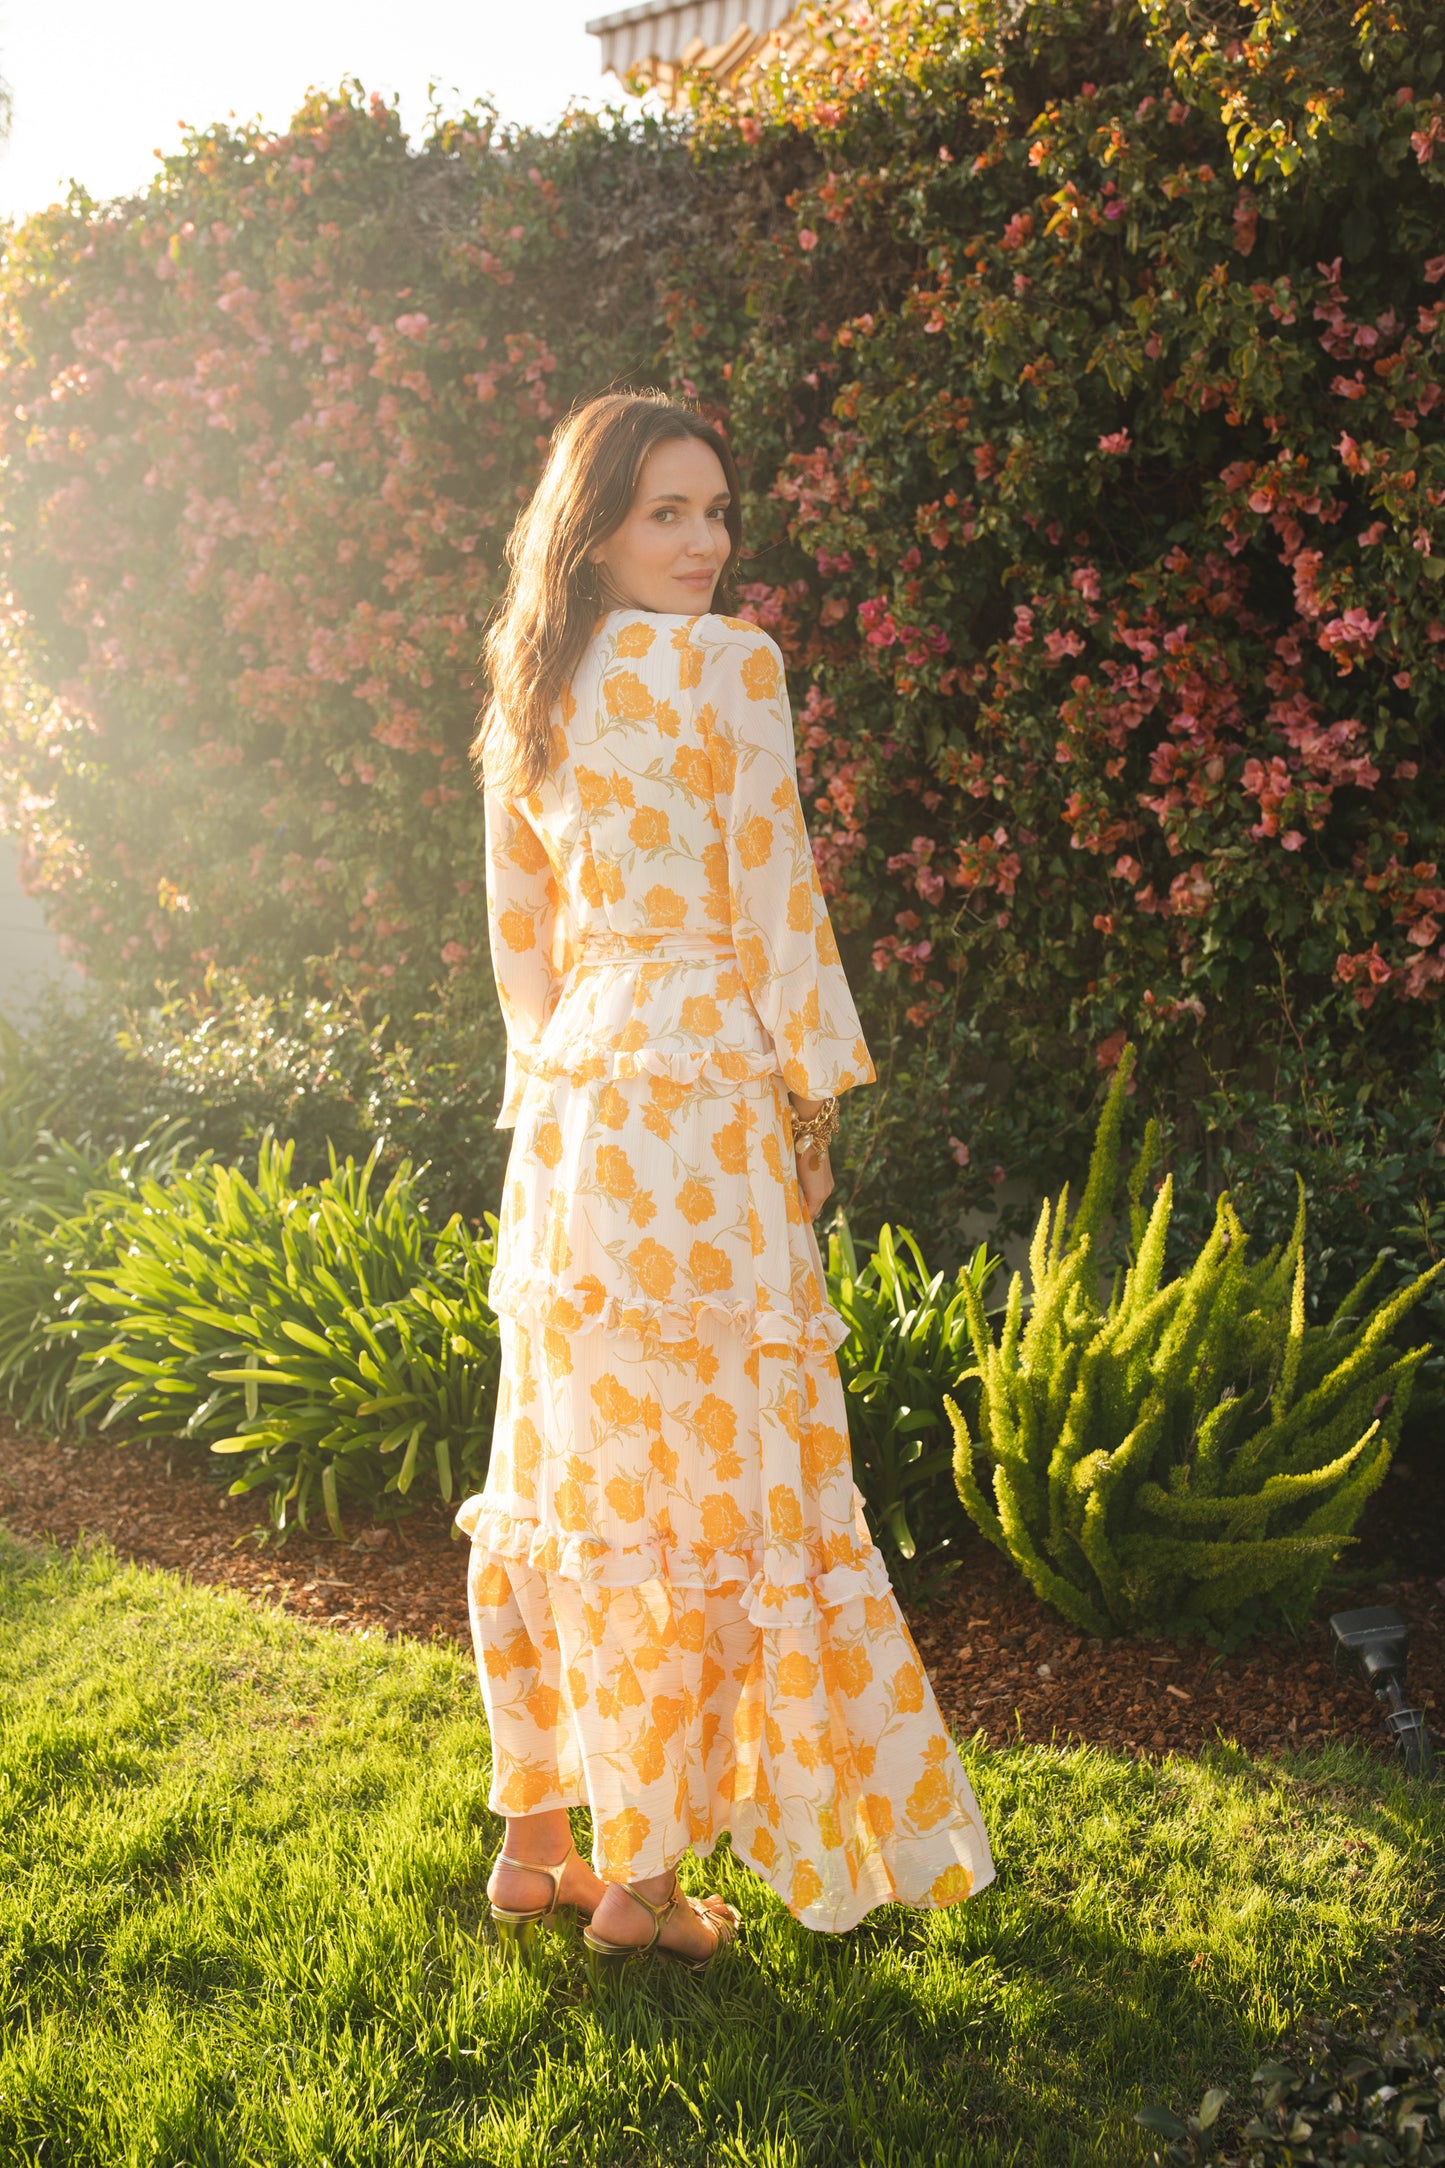 jennafer grace Amarillo Love Maxi Dress white with yellow flowers elegant simplicity high neck long sleeve cinched waist tie tiered skirt boho bohemian hippie romantic whimsical holiday dress spring floral handmade in California USA